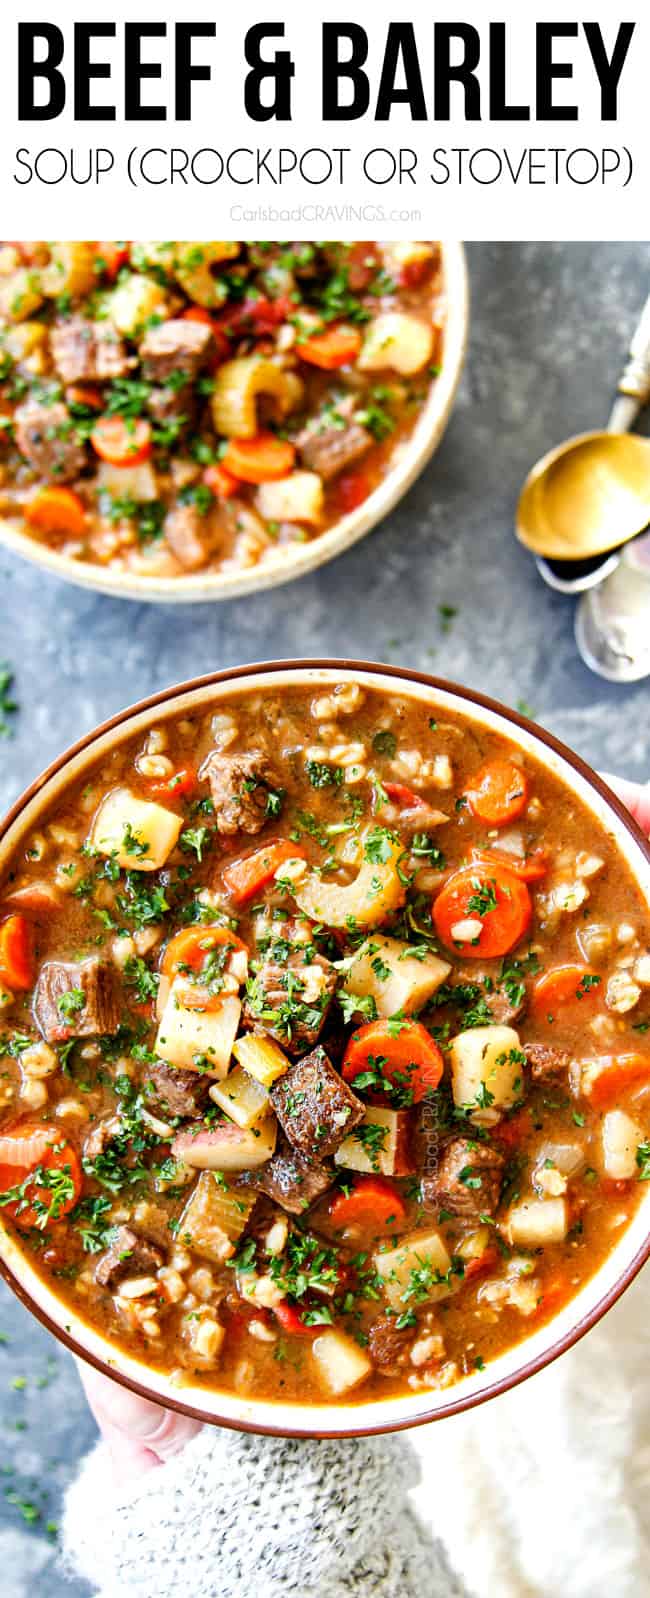 two hands holding a bowl of beef barley soup garnished with parsley